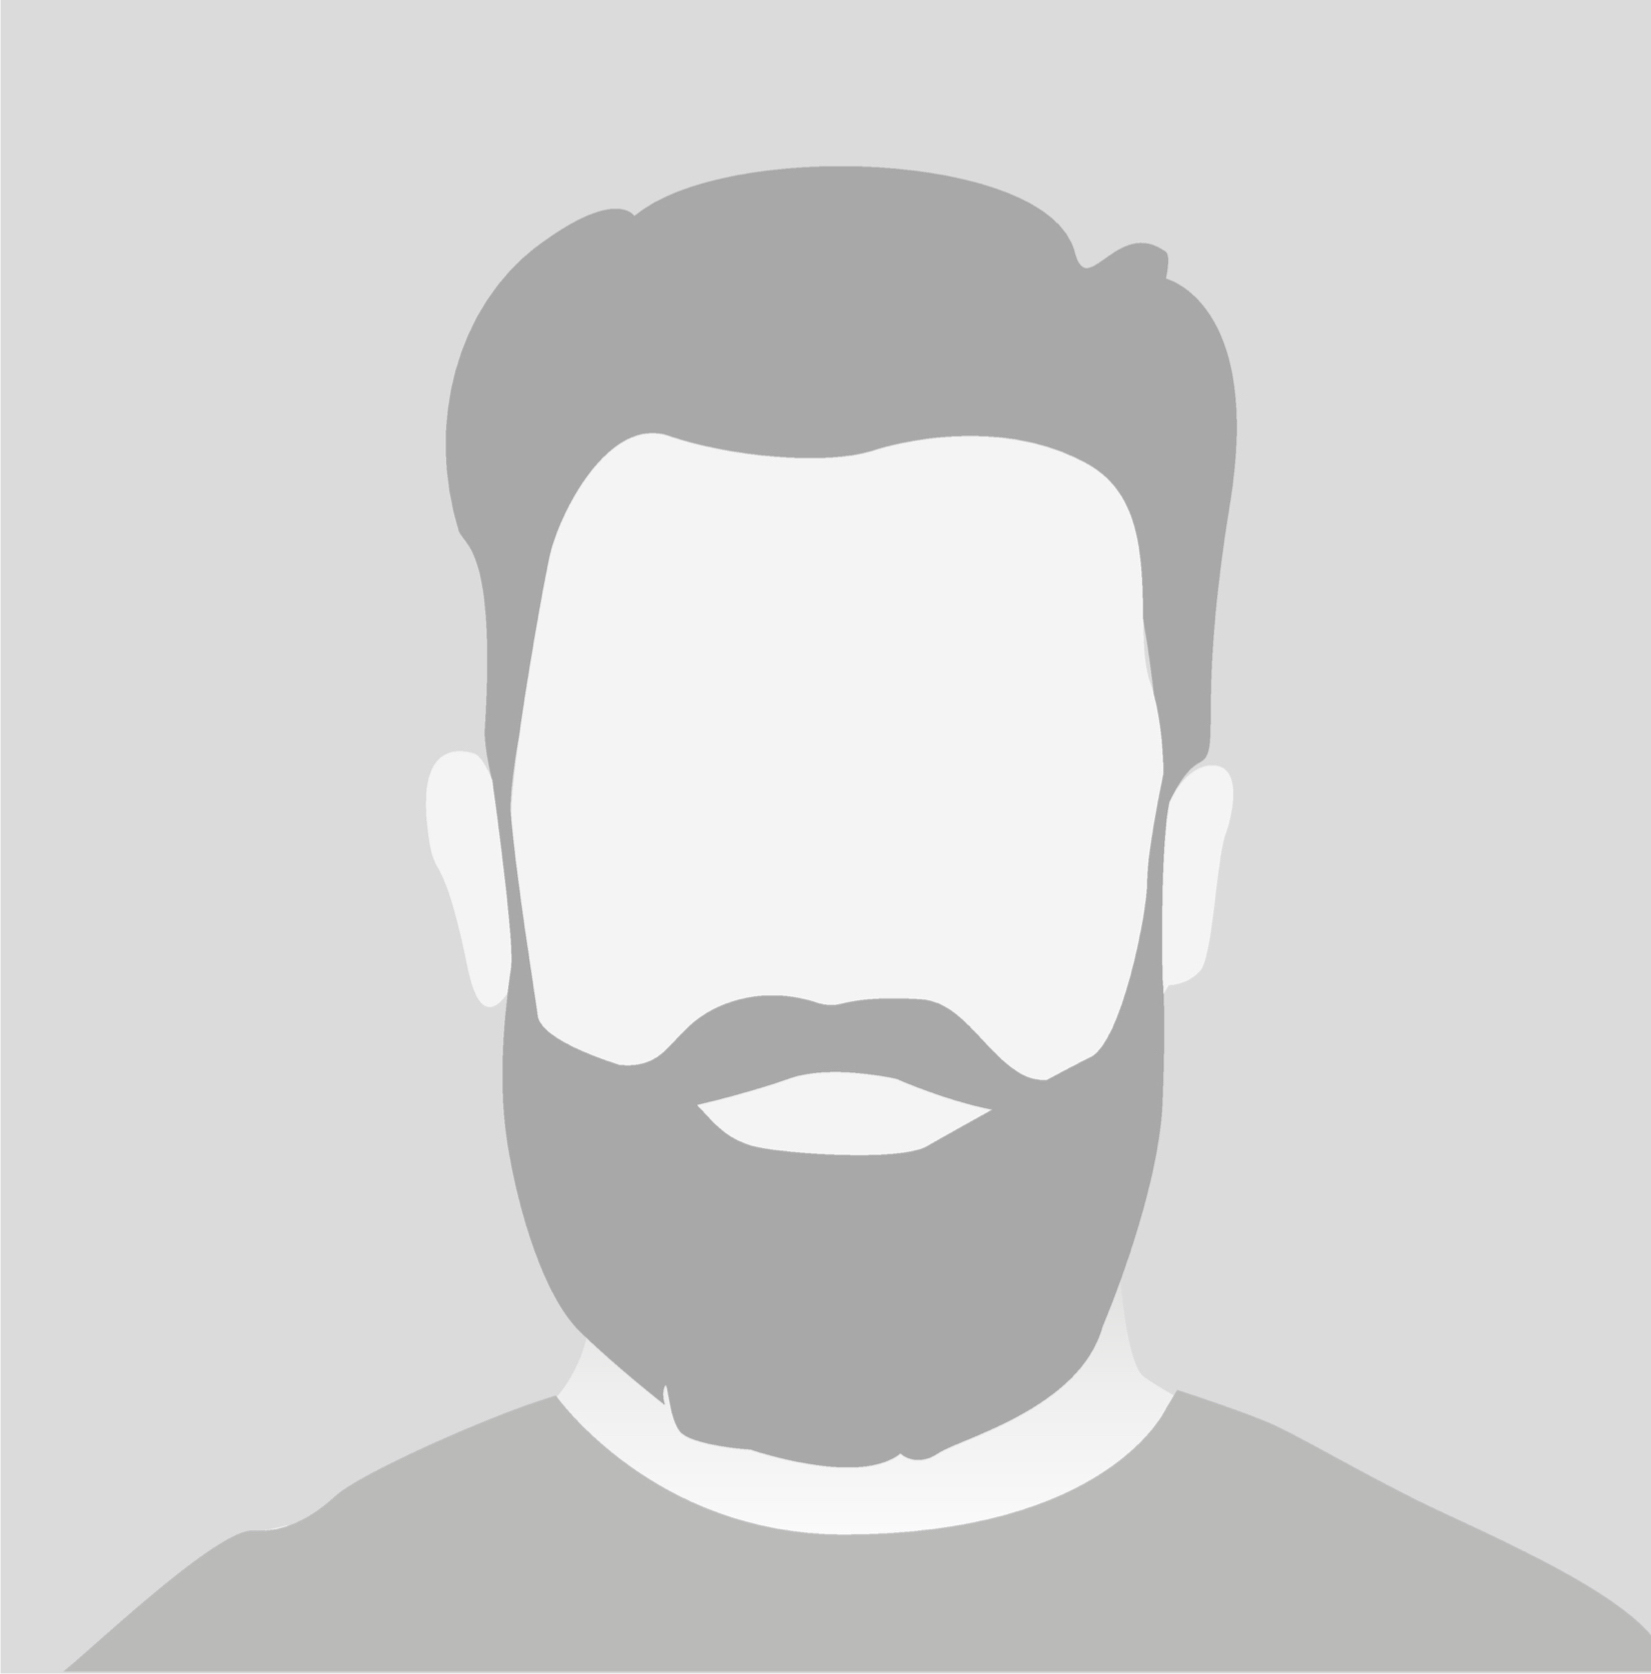 Default Placeholder Avatar Profile on Gray Background Man and Wo